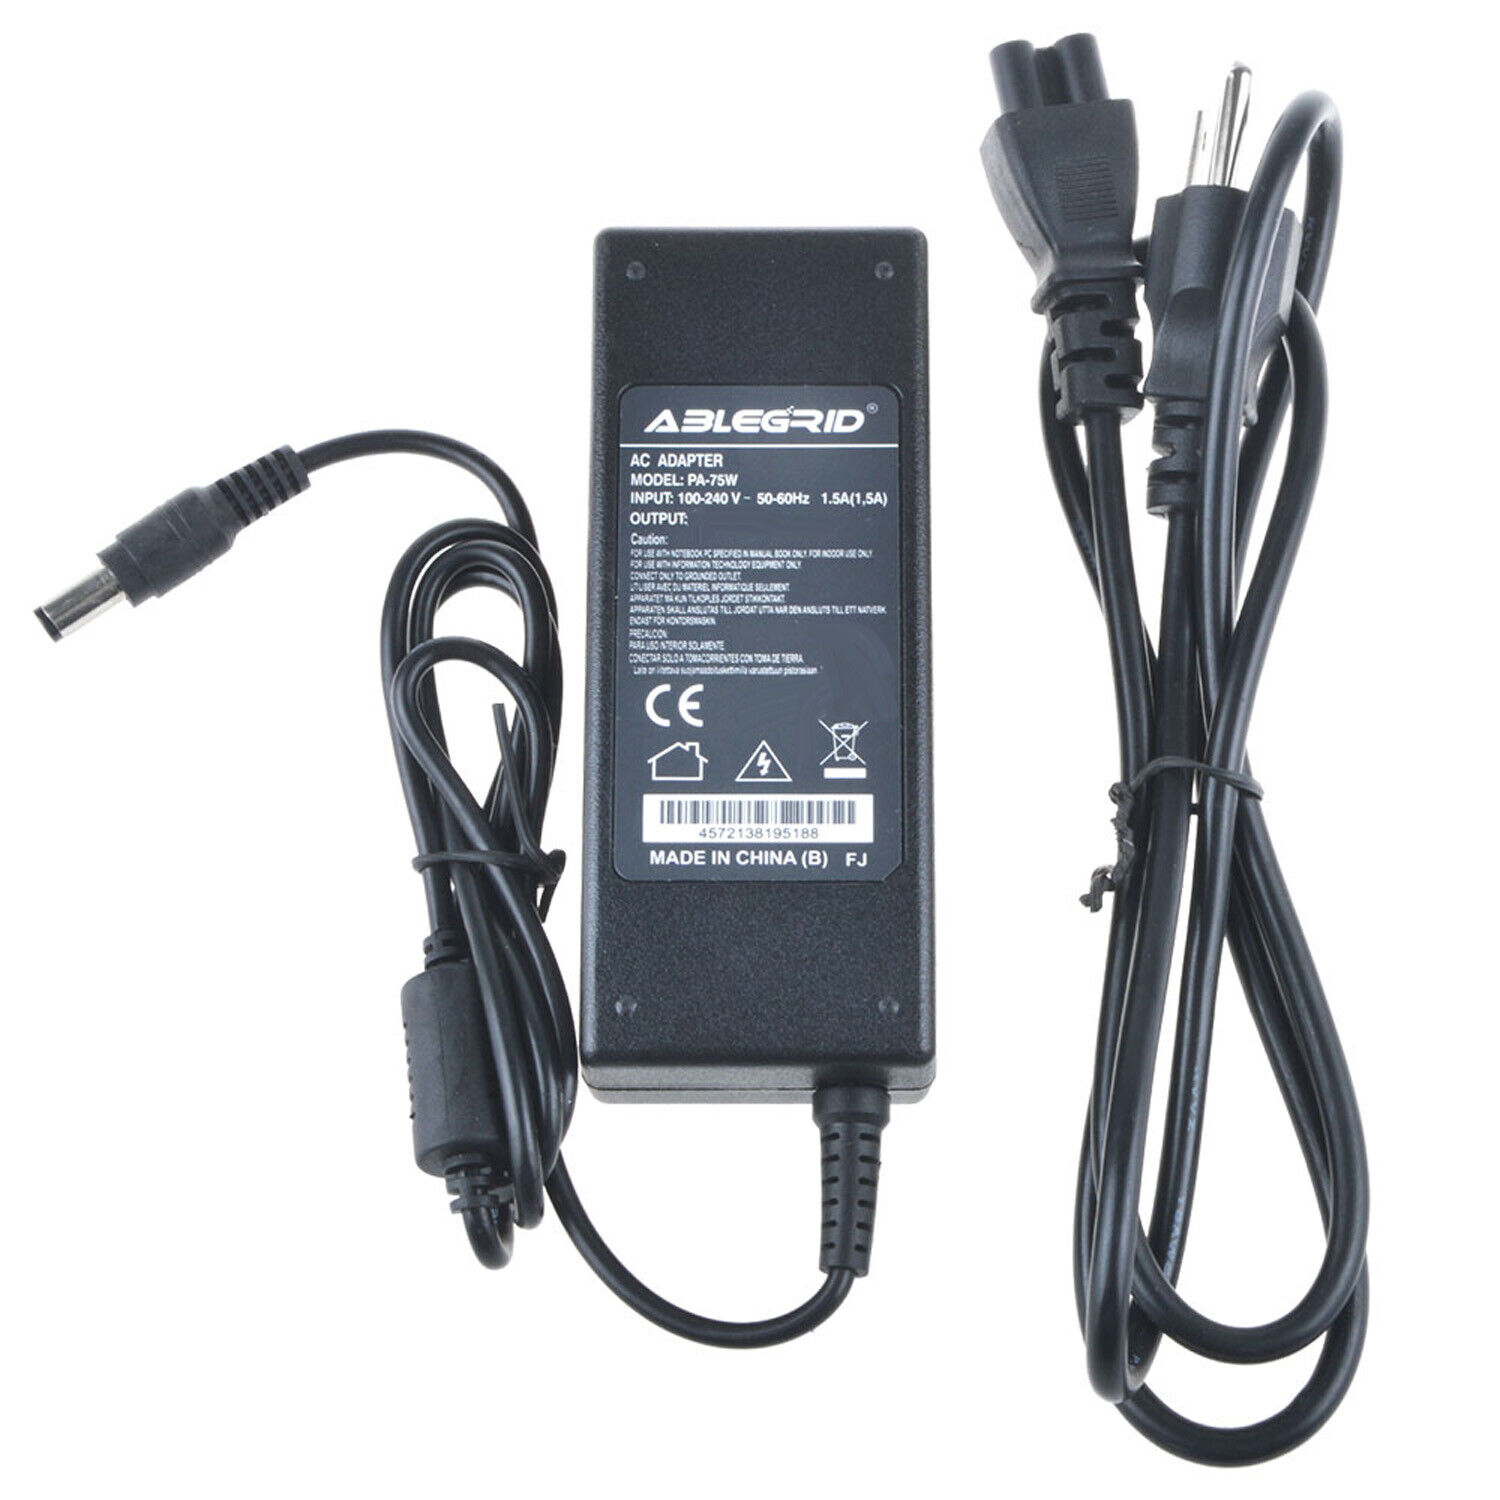 AC Adapter For CHUWI RzBox Mini PC 19V 4.74A 90W Charger Power Supply Cord PSU